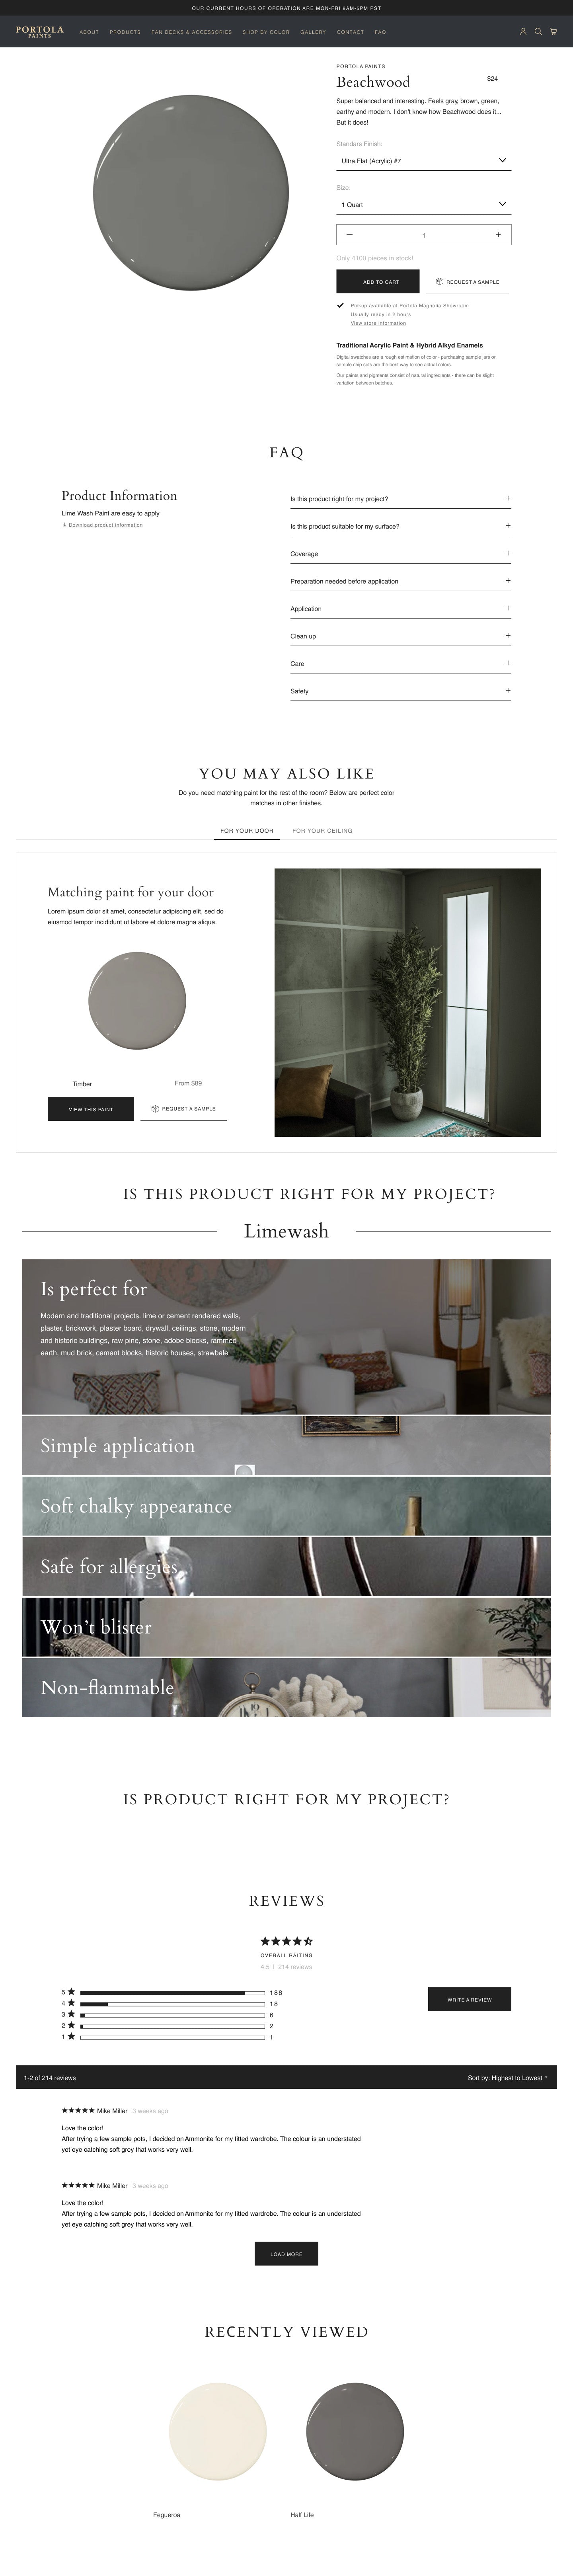 Portola Paints - Shopify Website by Conspire Agency